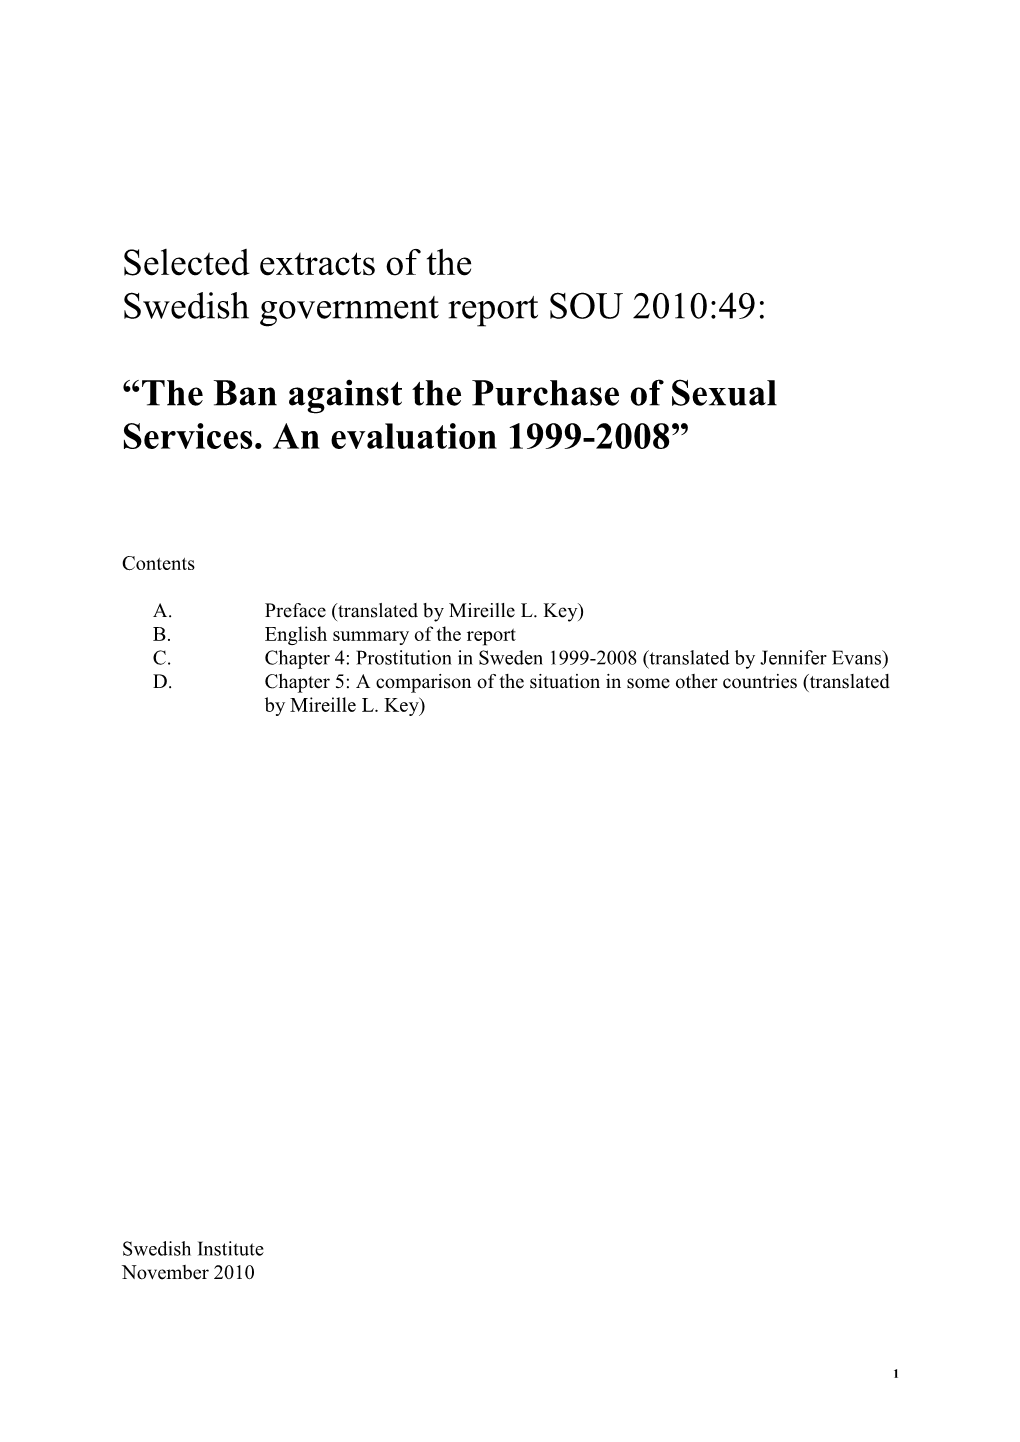 The Ban Against the Purchase of Sexual Services